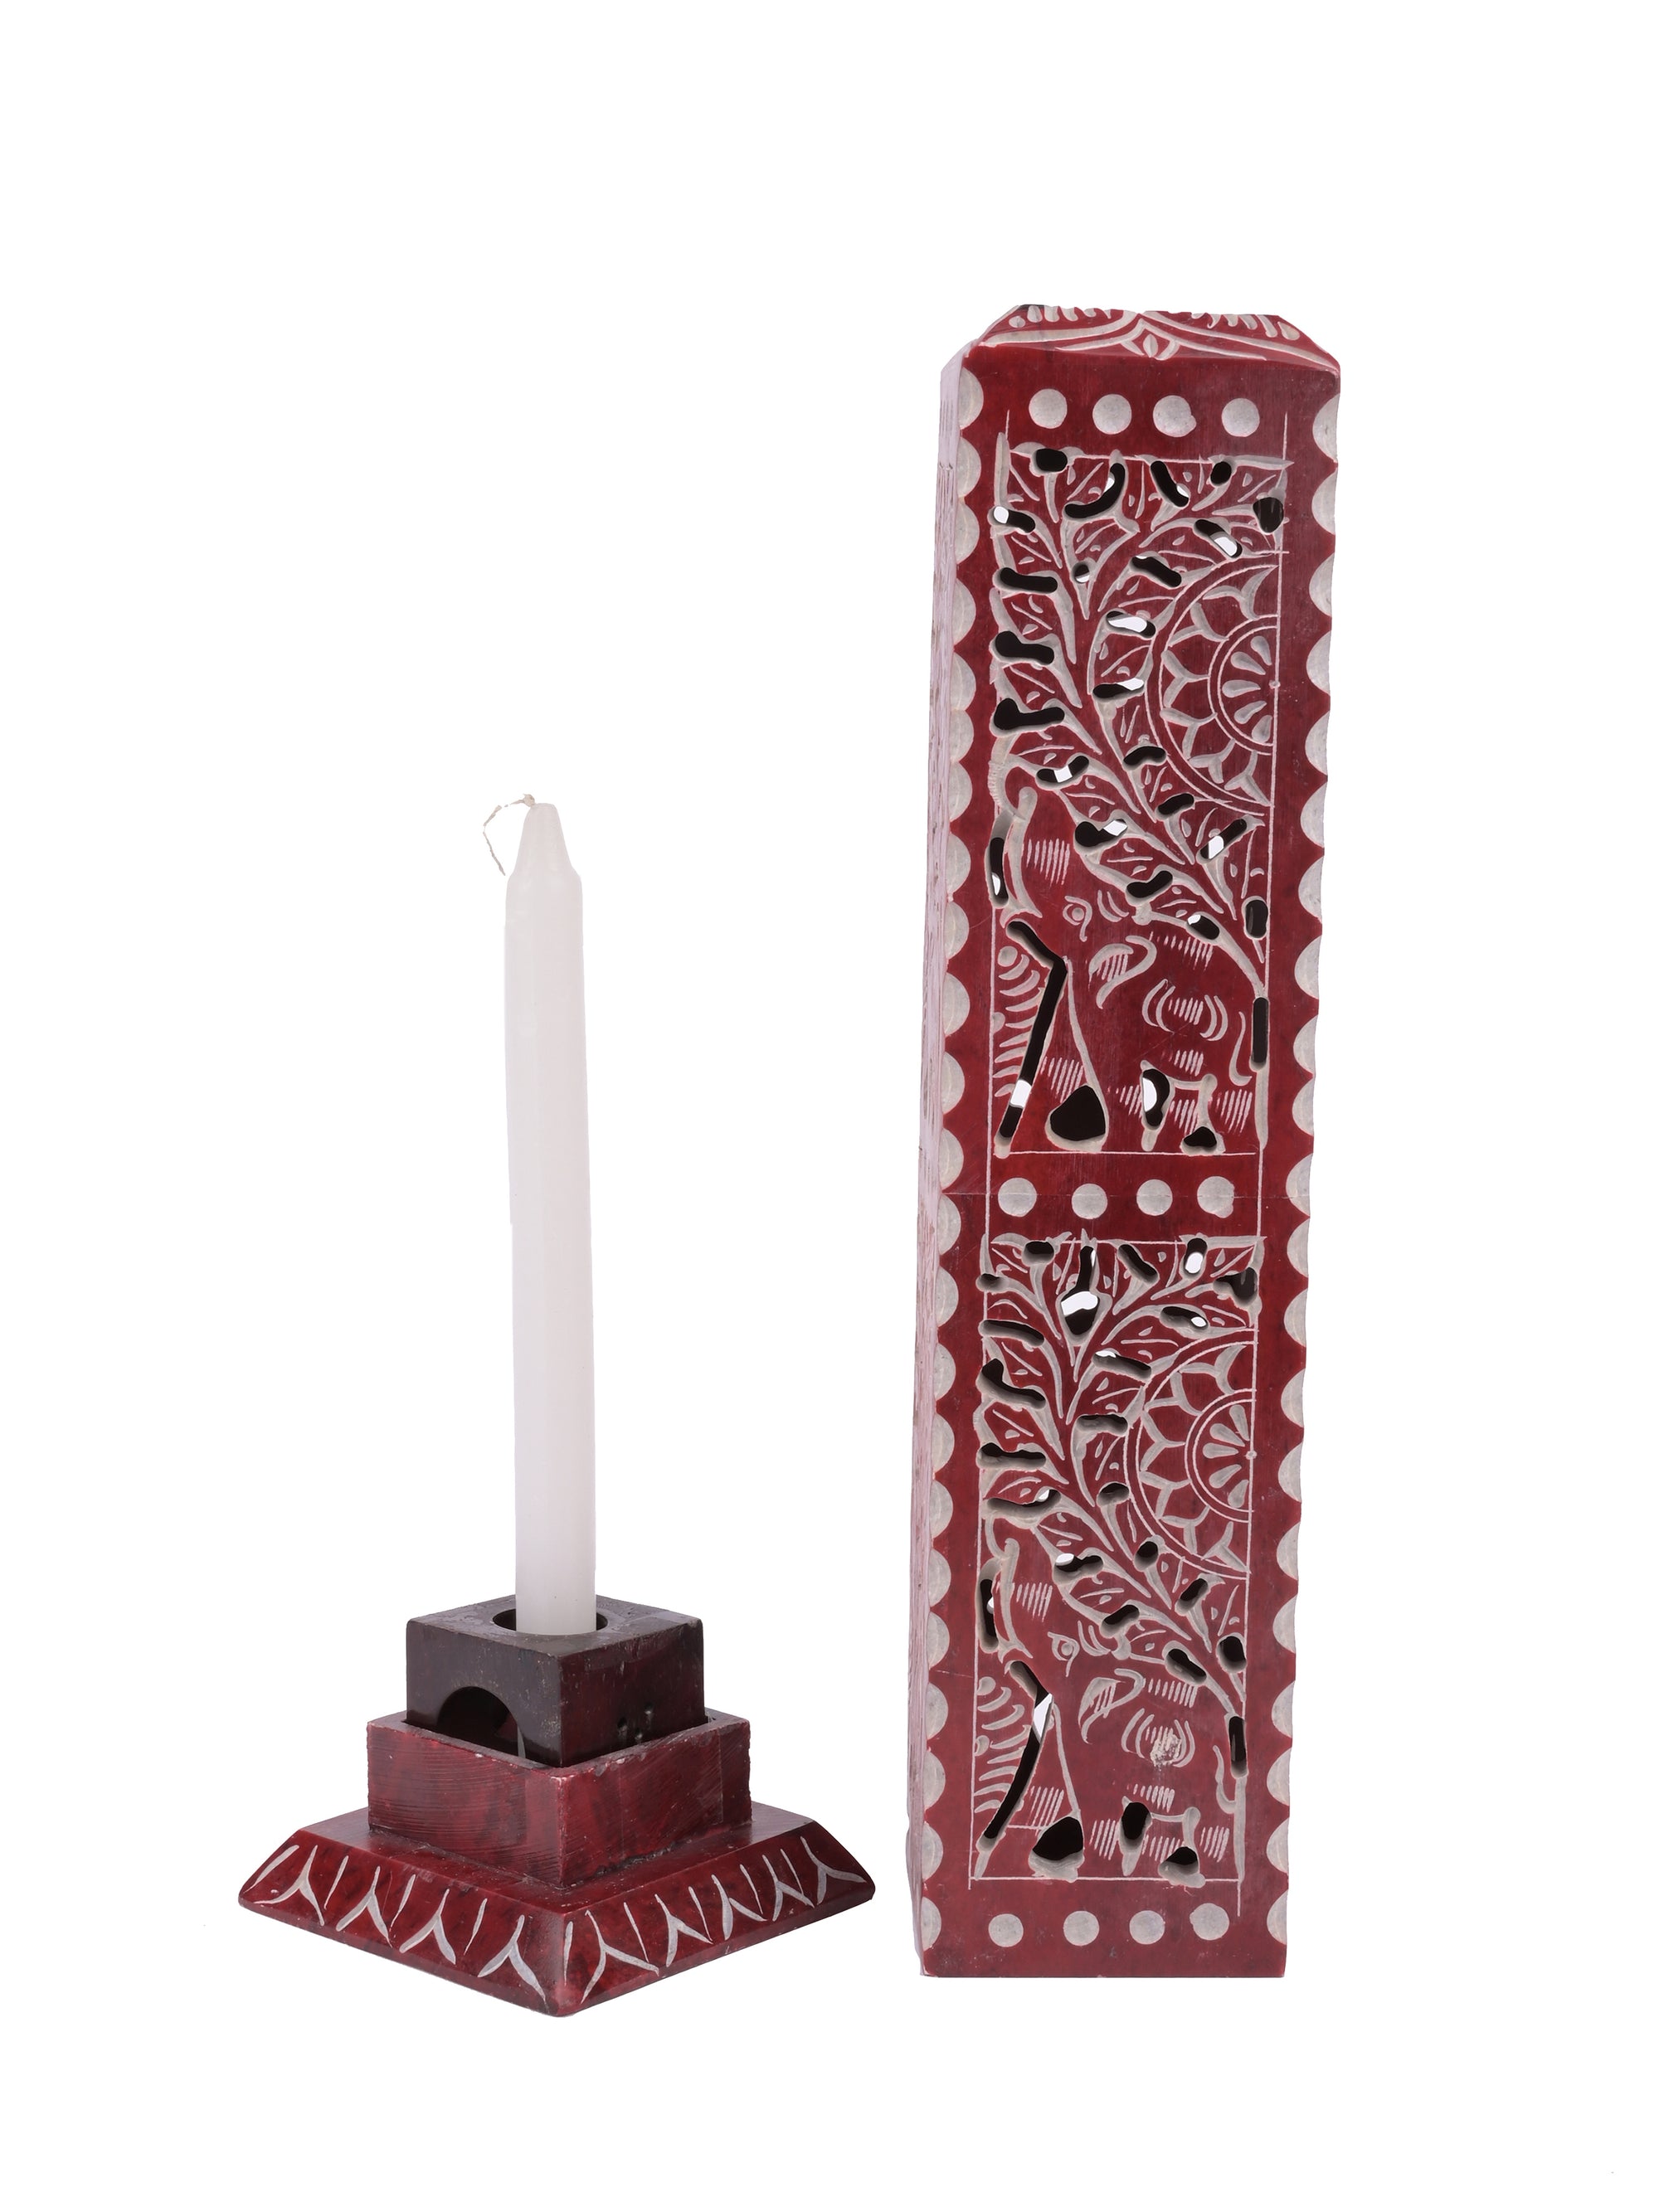 Soapstone carved colorful Agarbatti and Candle stand - 2 in 1 - 11 inches height - The Heritage Artifacts